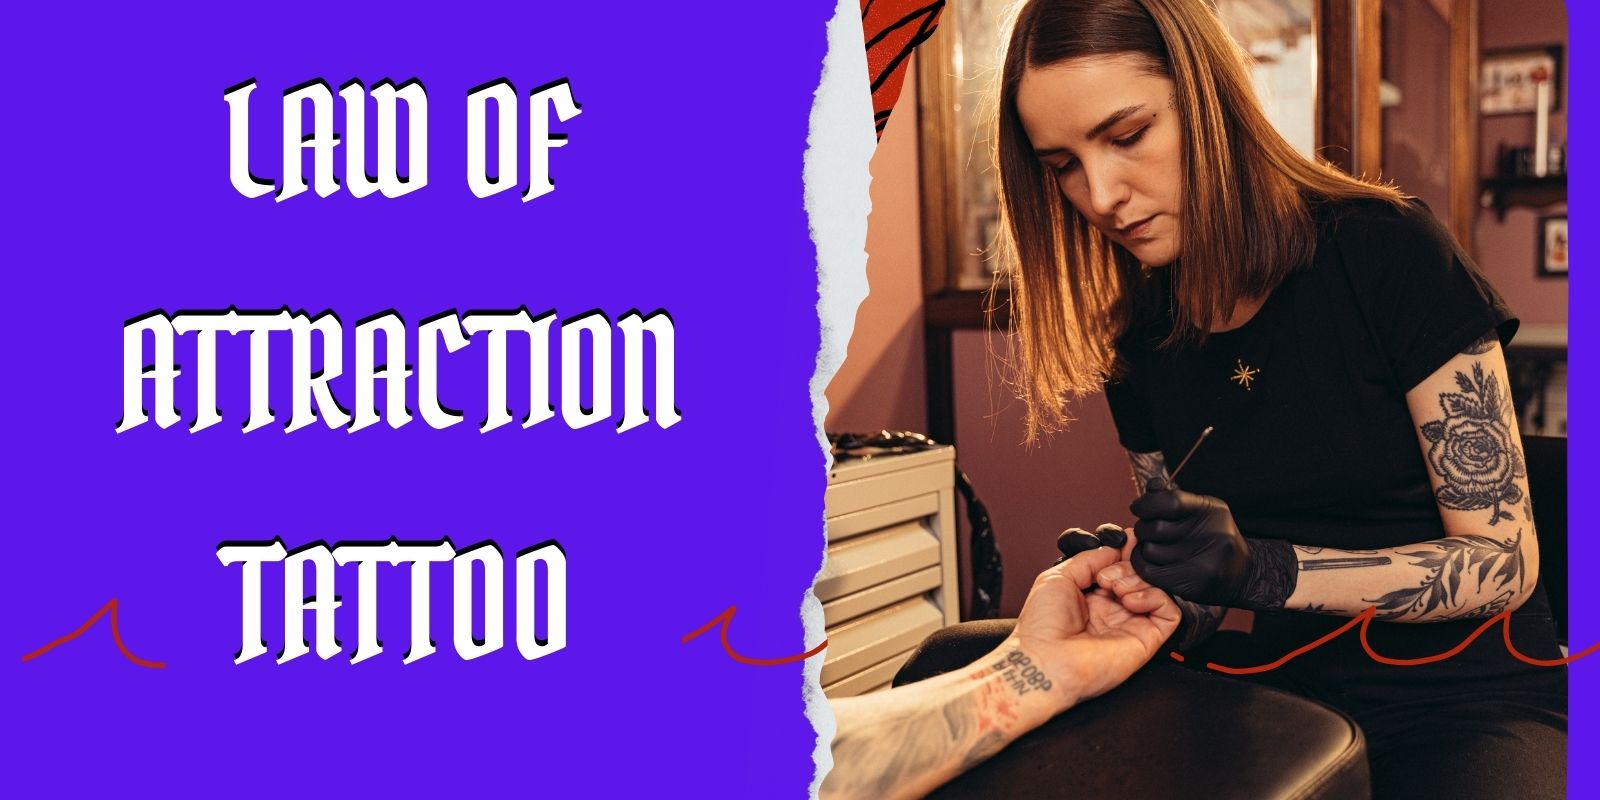 law of attraction tattoo